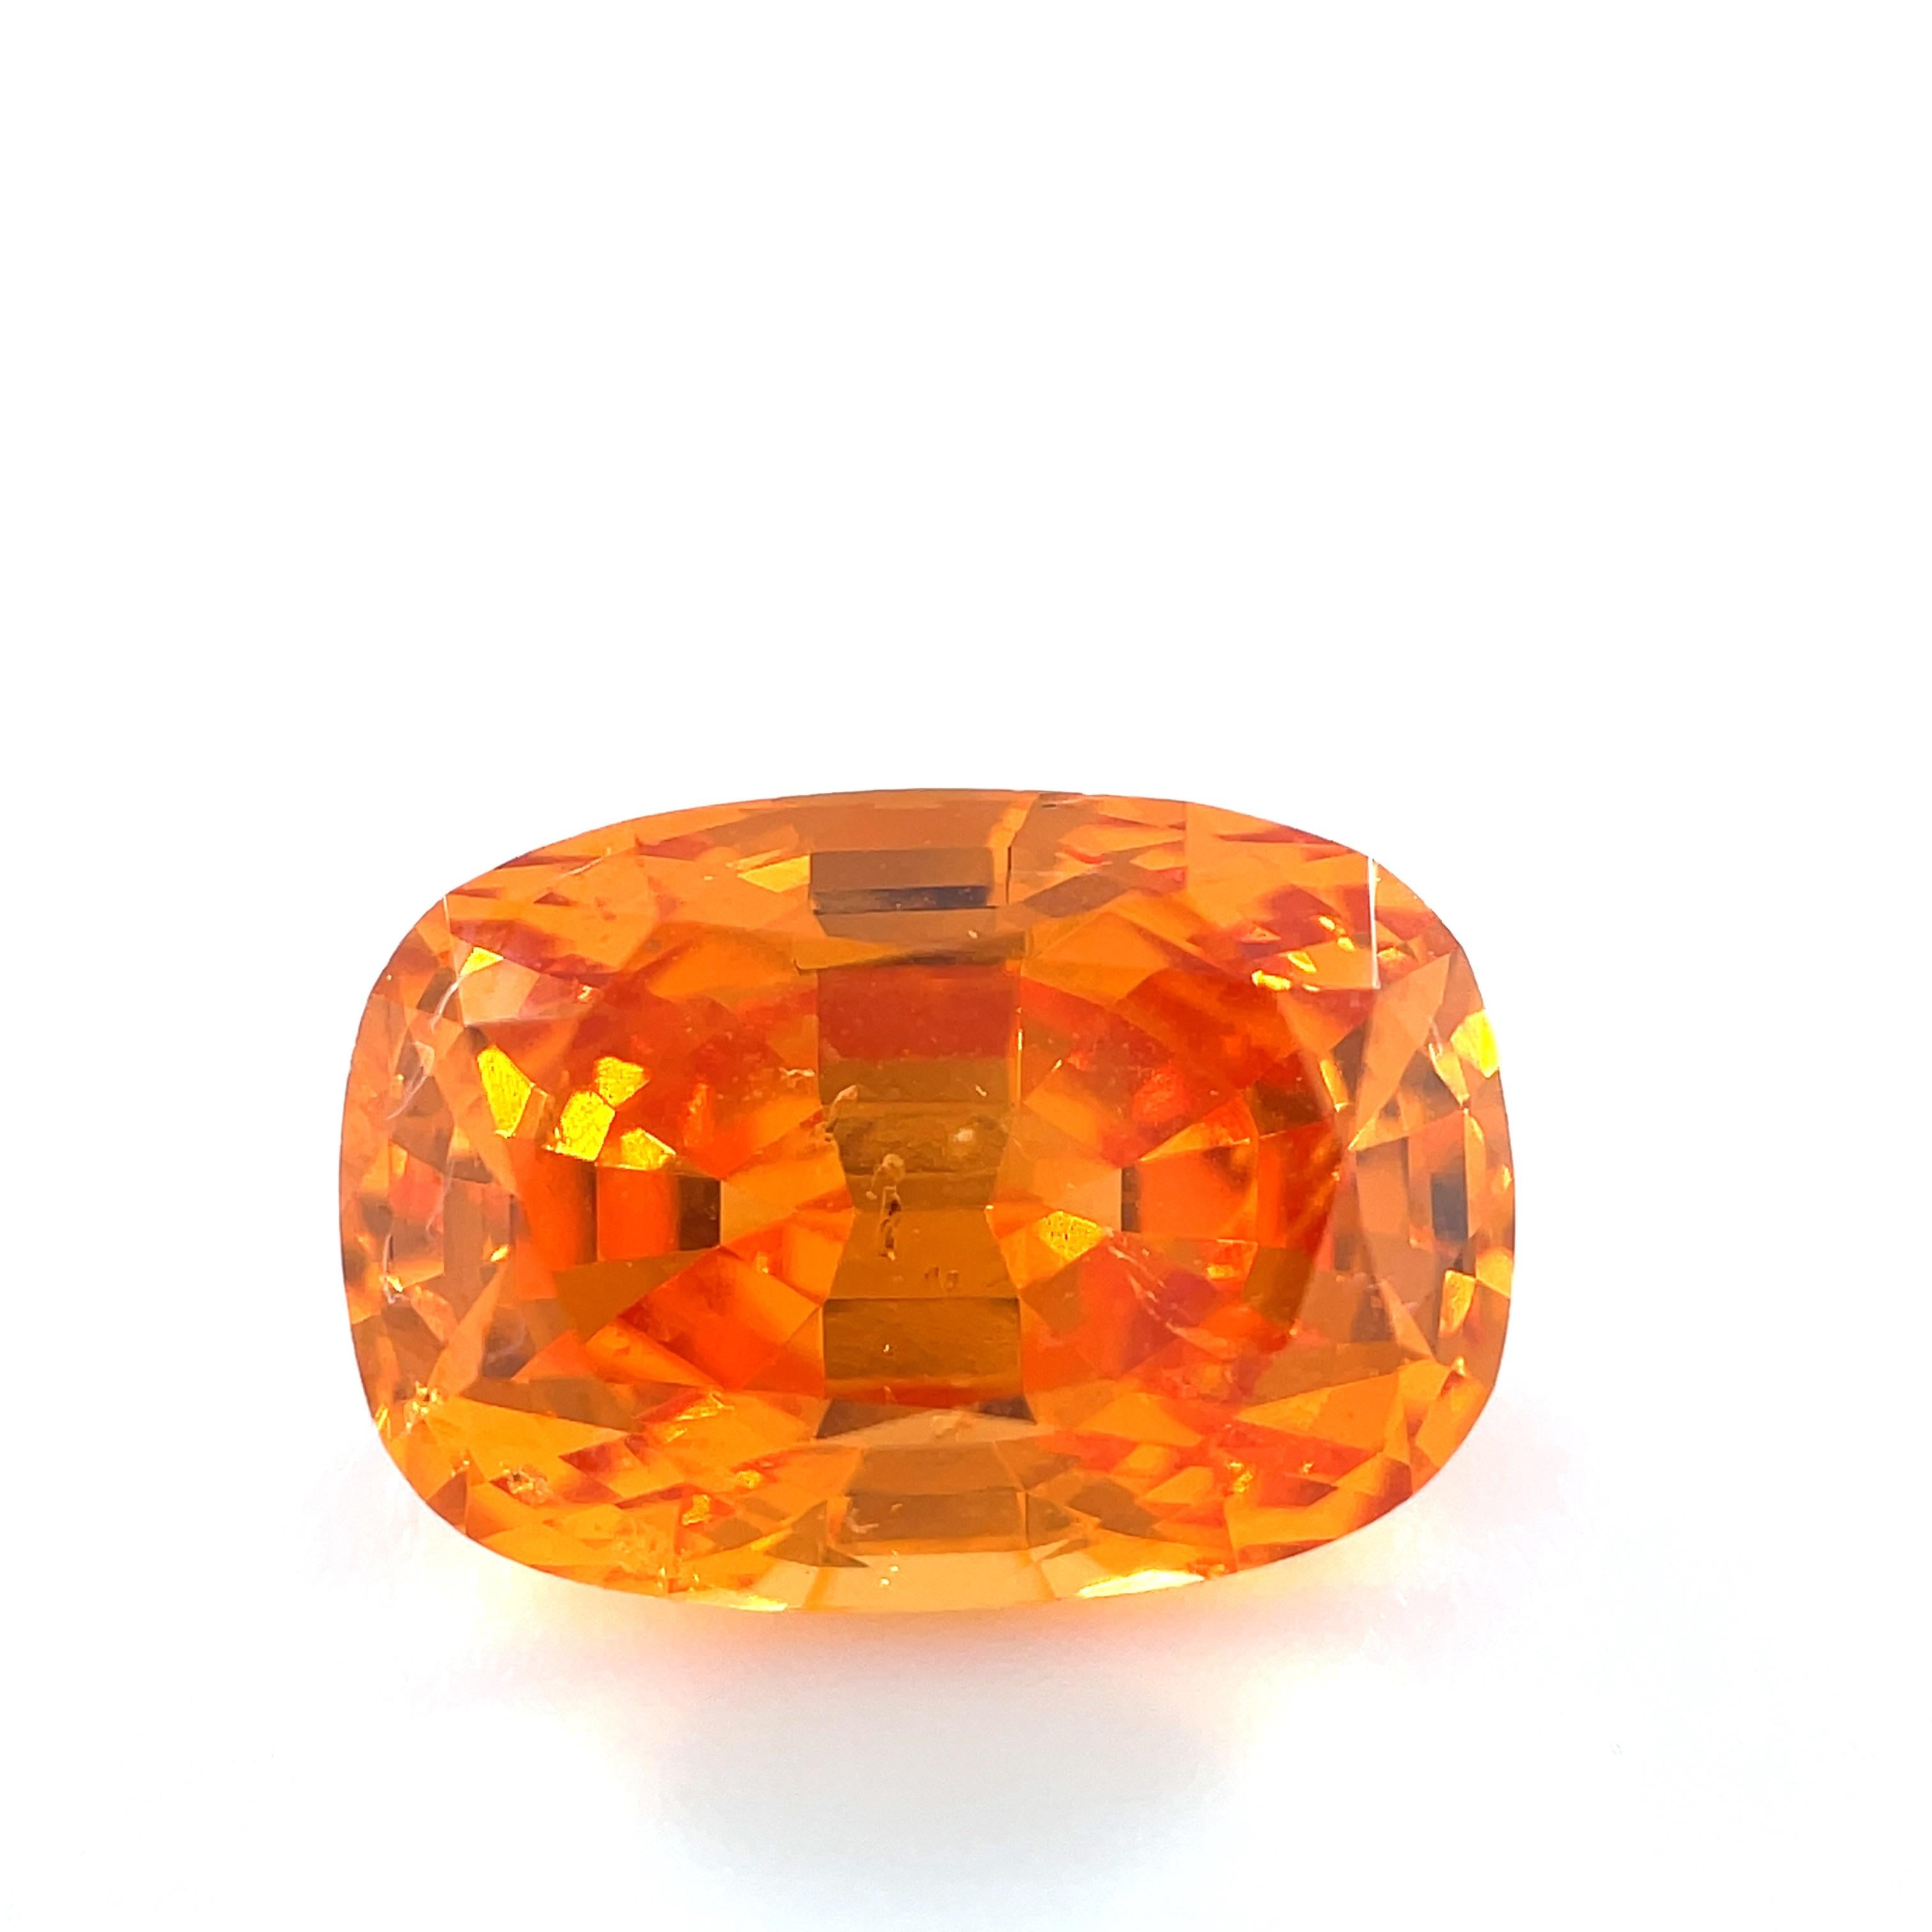 This 4.97 carat cushion-cut Mandarin garnet is absolutely gorgeous! Spessartite garnets are a beautiful variety of January's birthstone that occur in a range of striking orange hues. The finest spessartite garnets are called 